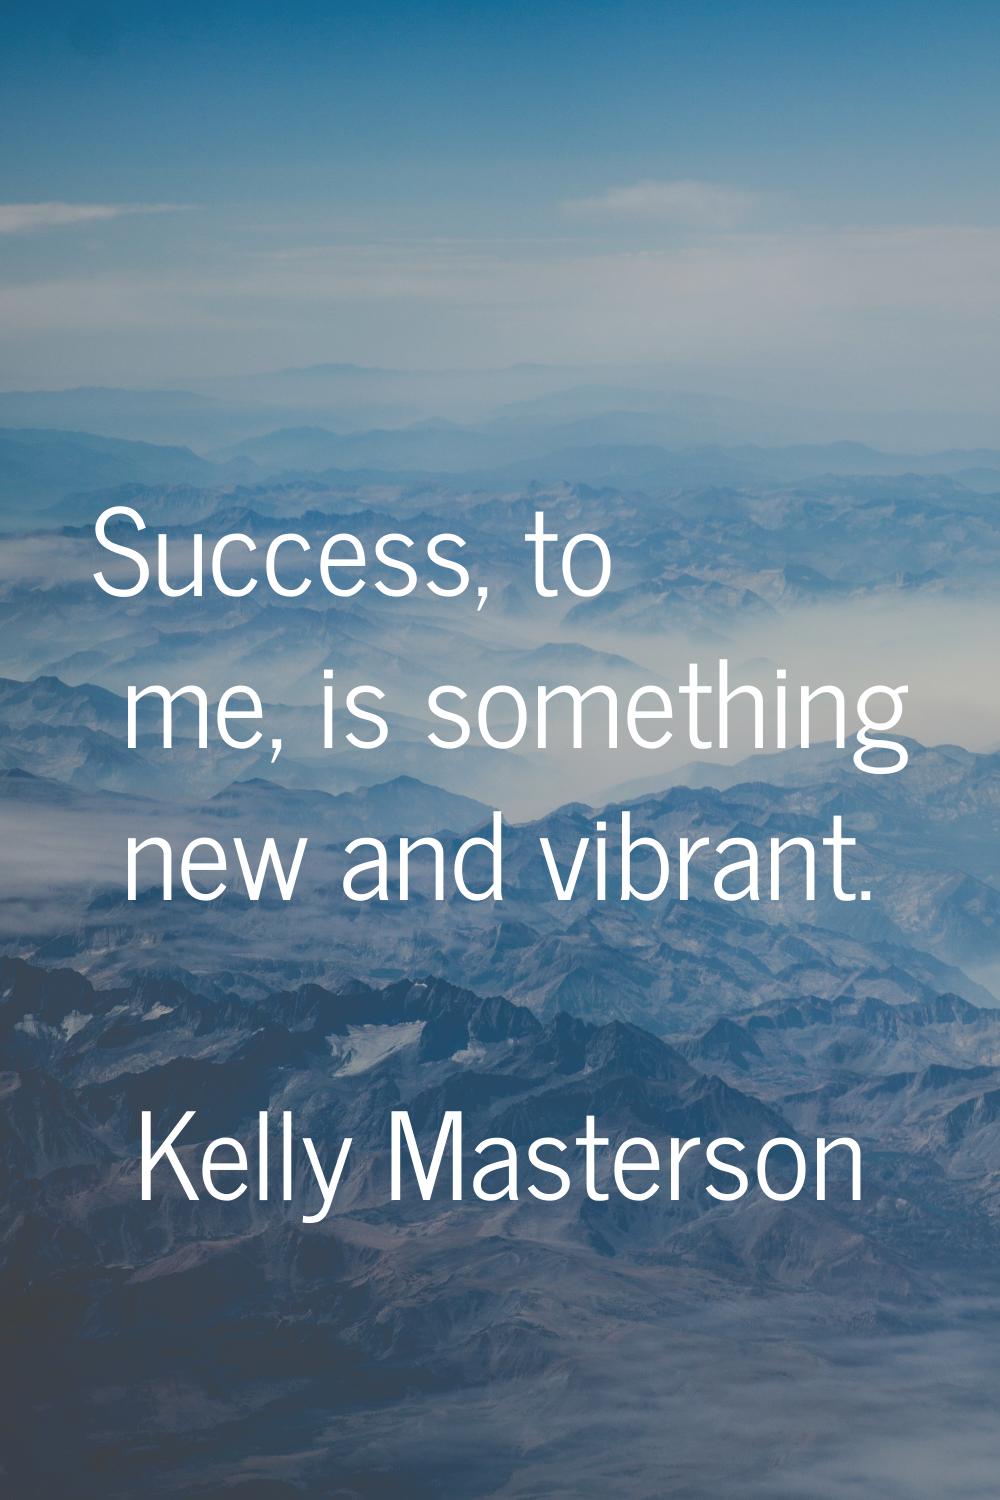 Success, to me, is something new and vibrant.